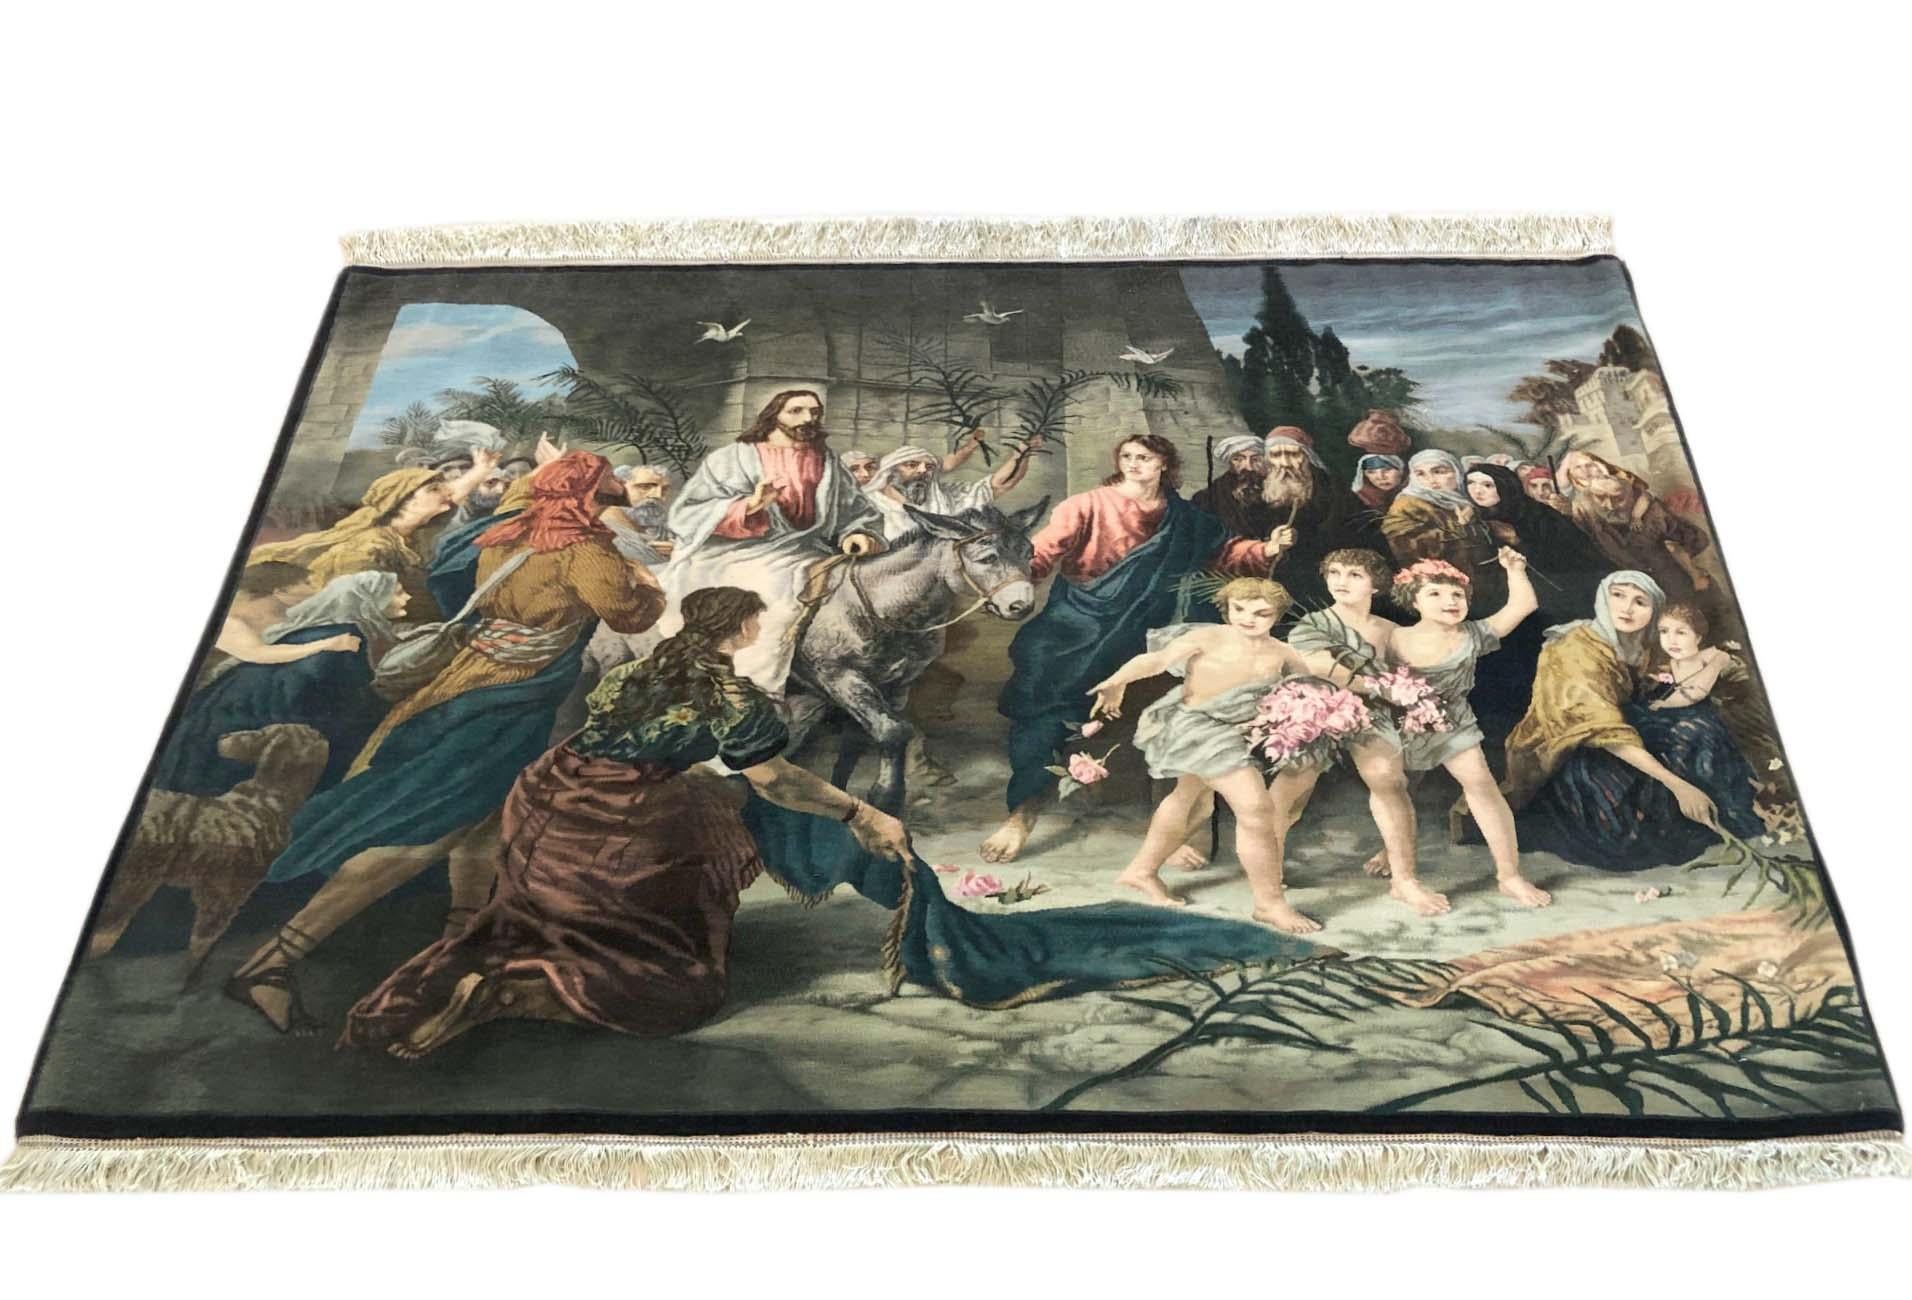 This beautiful authentic rug has been woven in Tabriz, Iran. This rug features a history of Jesus Christ and scenery. The pile is wool with silk foundation. The size is 3 feet 11 wide inches by 5 feet 10 inch tall.  In this brand new rug the